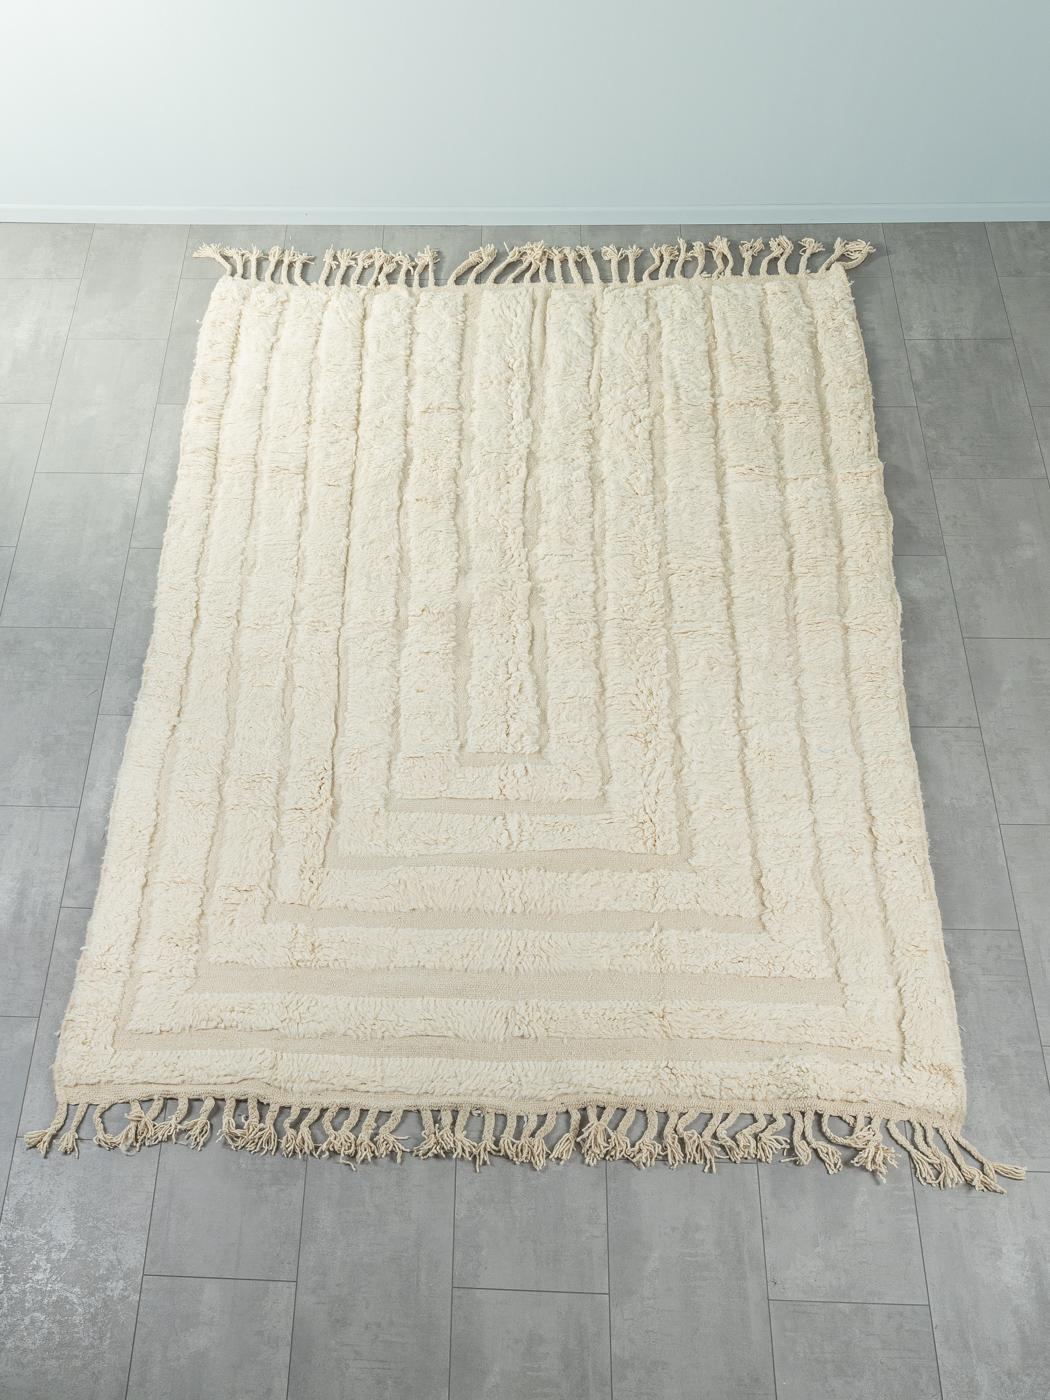 Mountains is a contemporary 100% wool rug – thick and soft, comfortable underfoot. Our Berber rugs are handwoven and handknotted by Amazigh women in the Atlas Mountains. These communities have been crafting rugs for thousands of years. One knot at a